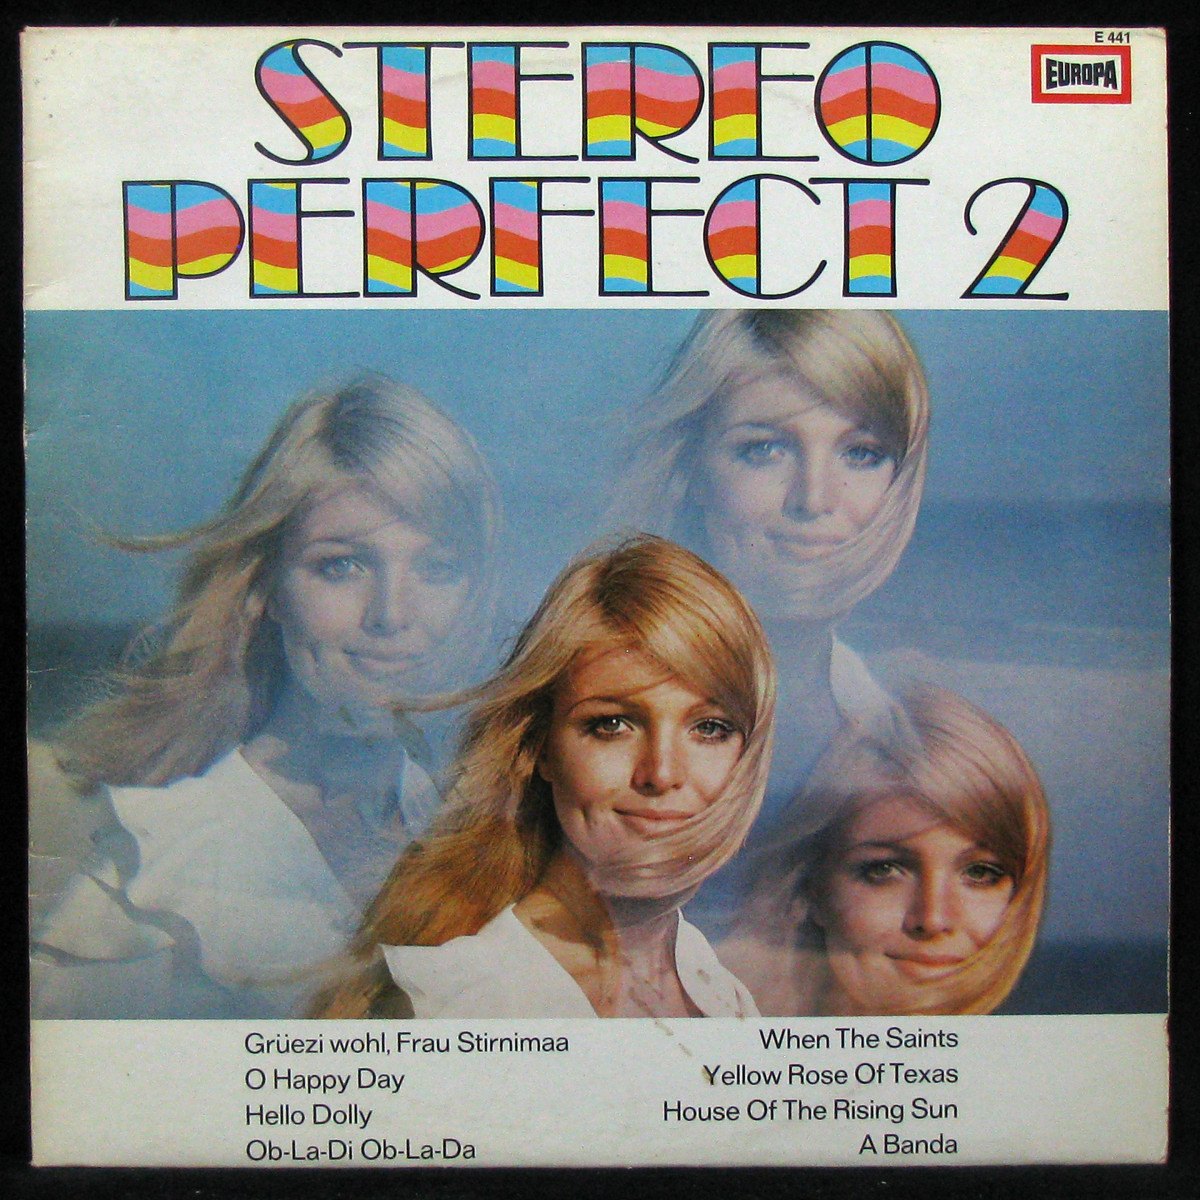 Stereo Perfect 2